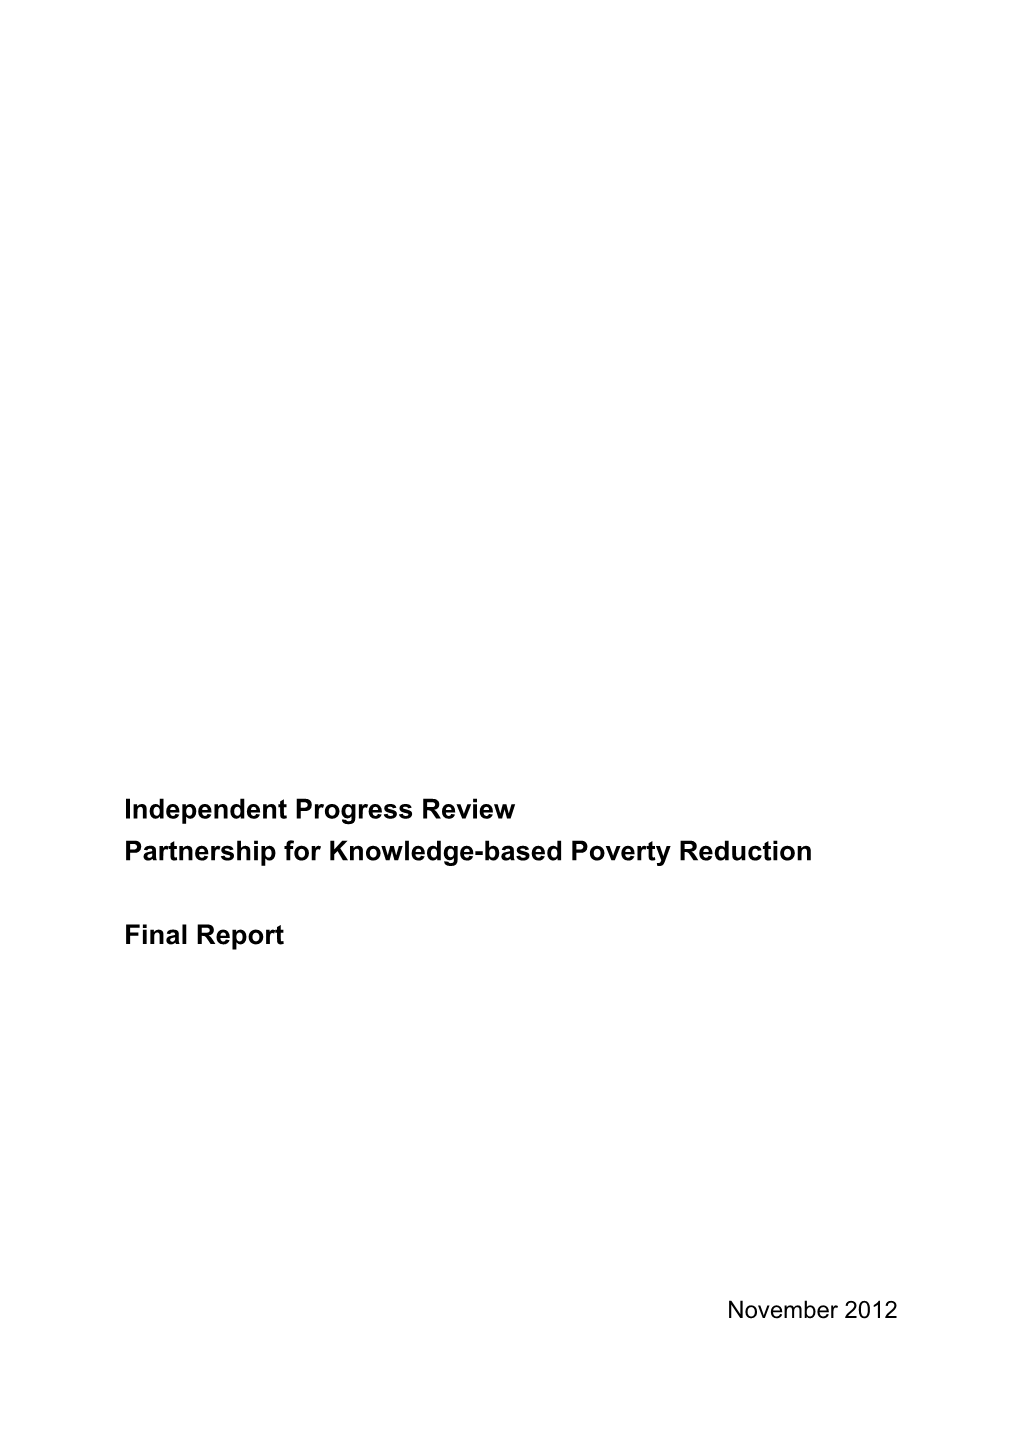 Partnership for Knowledge-Based Poverty Reduction